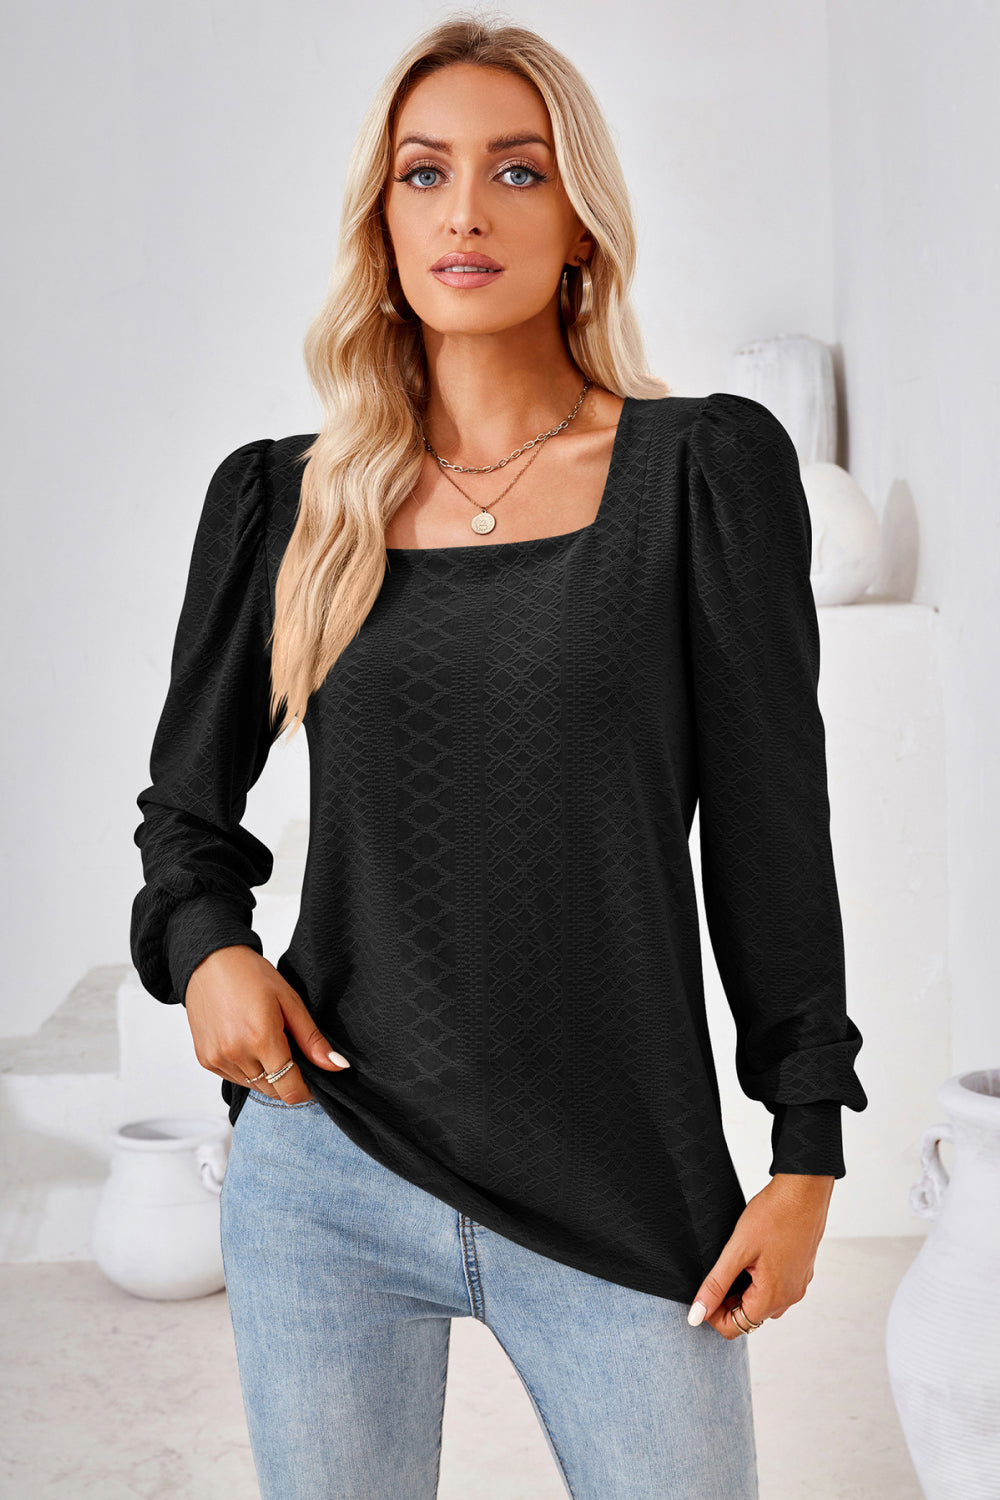 Square Neck Puff Sleeve Blouse - Black / S - Women’s Clothing & Accessories - Shirts & Tops - 12 - 2024